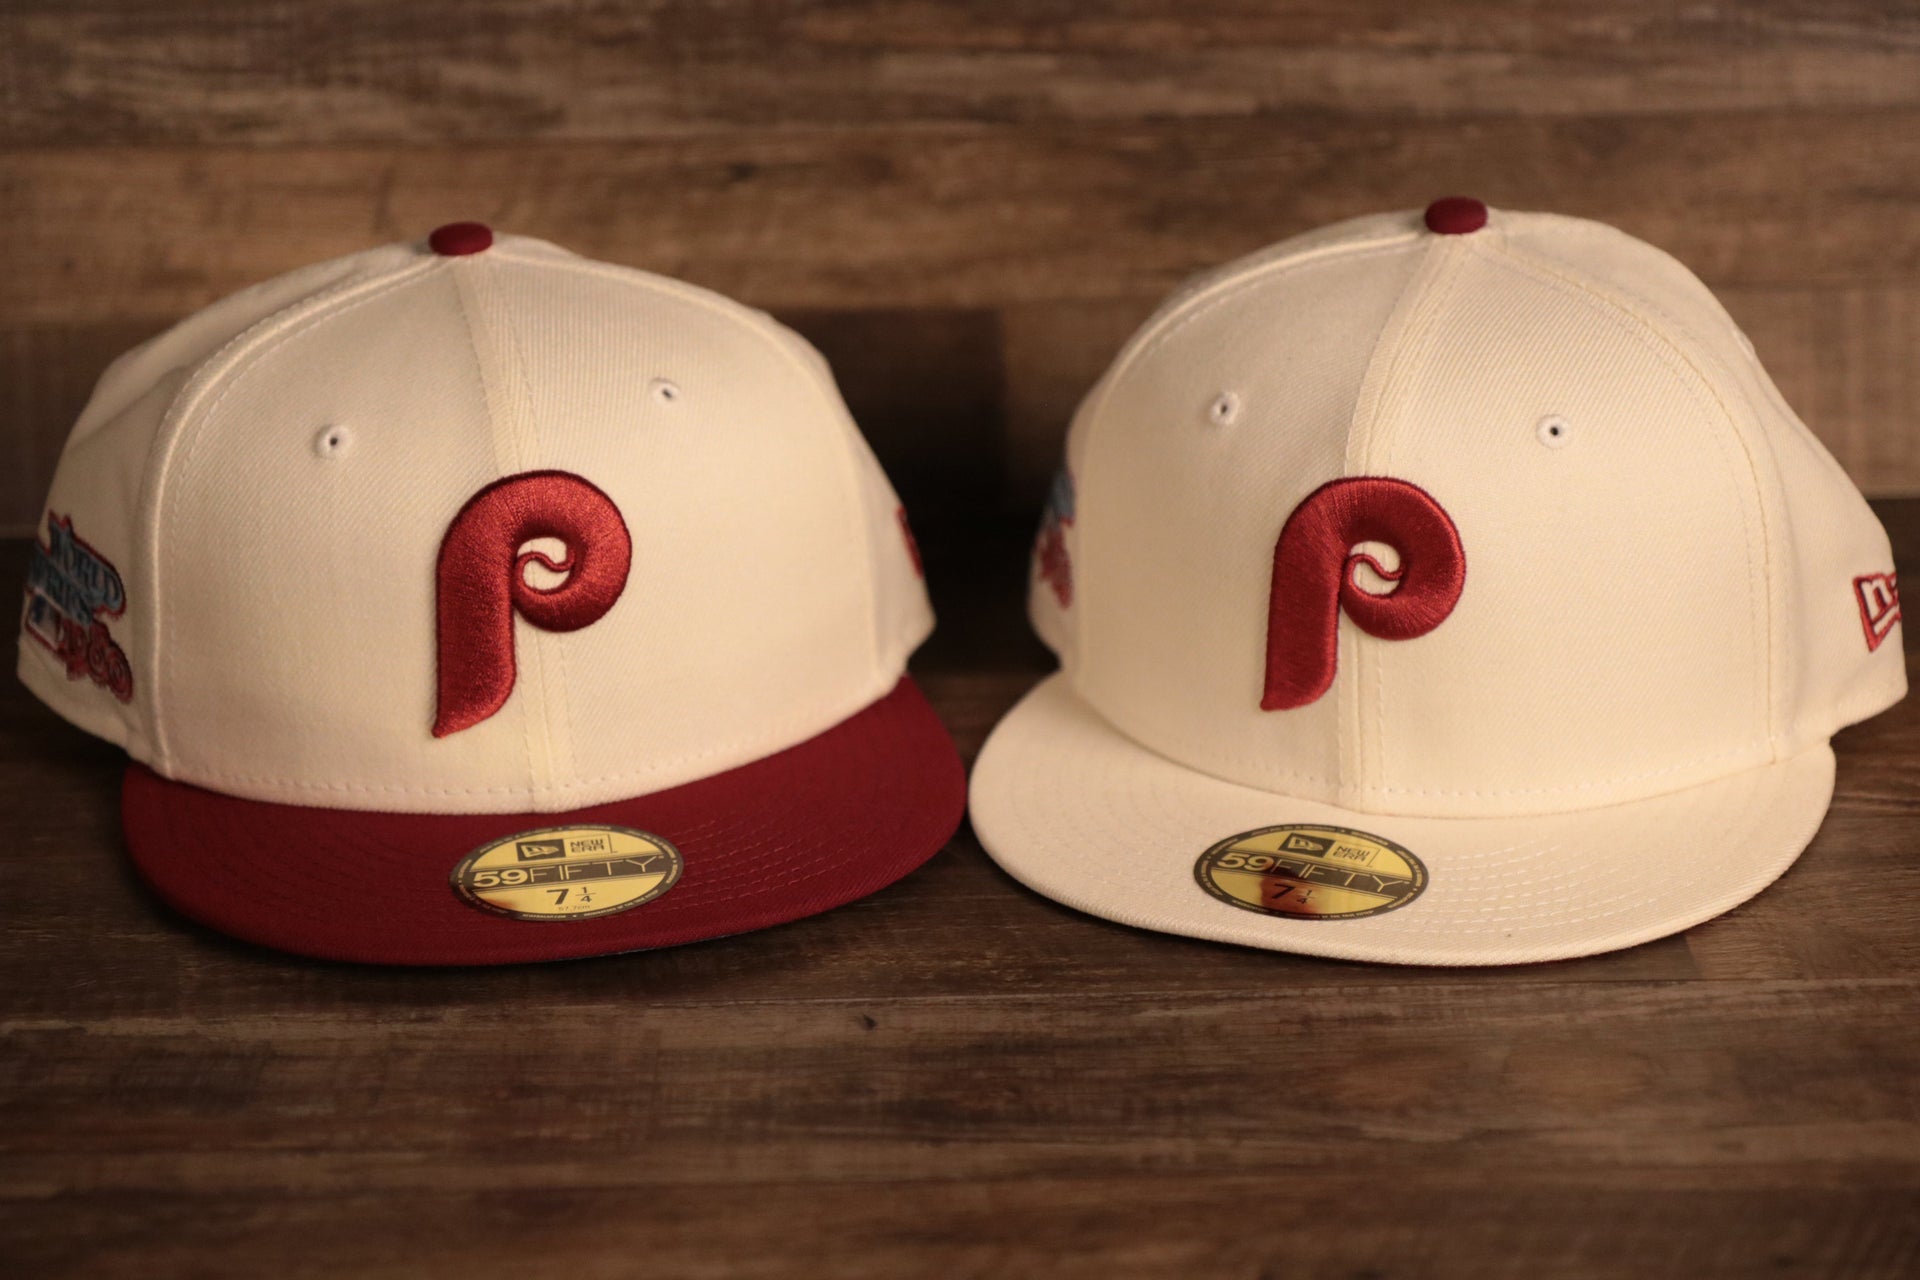 Maroon Brim Fitted Caps | Maroon Bottom Fitteds | Maroon Under Brim 59Fifty Caps